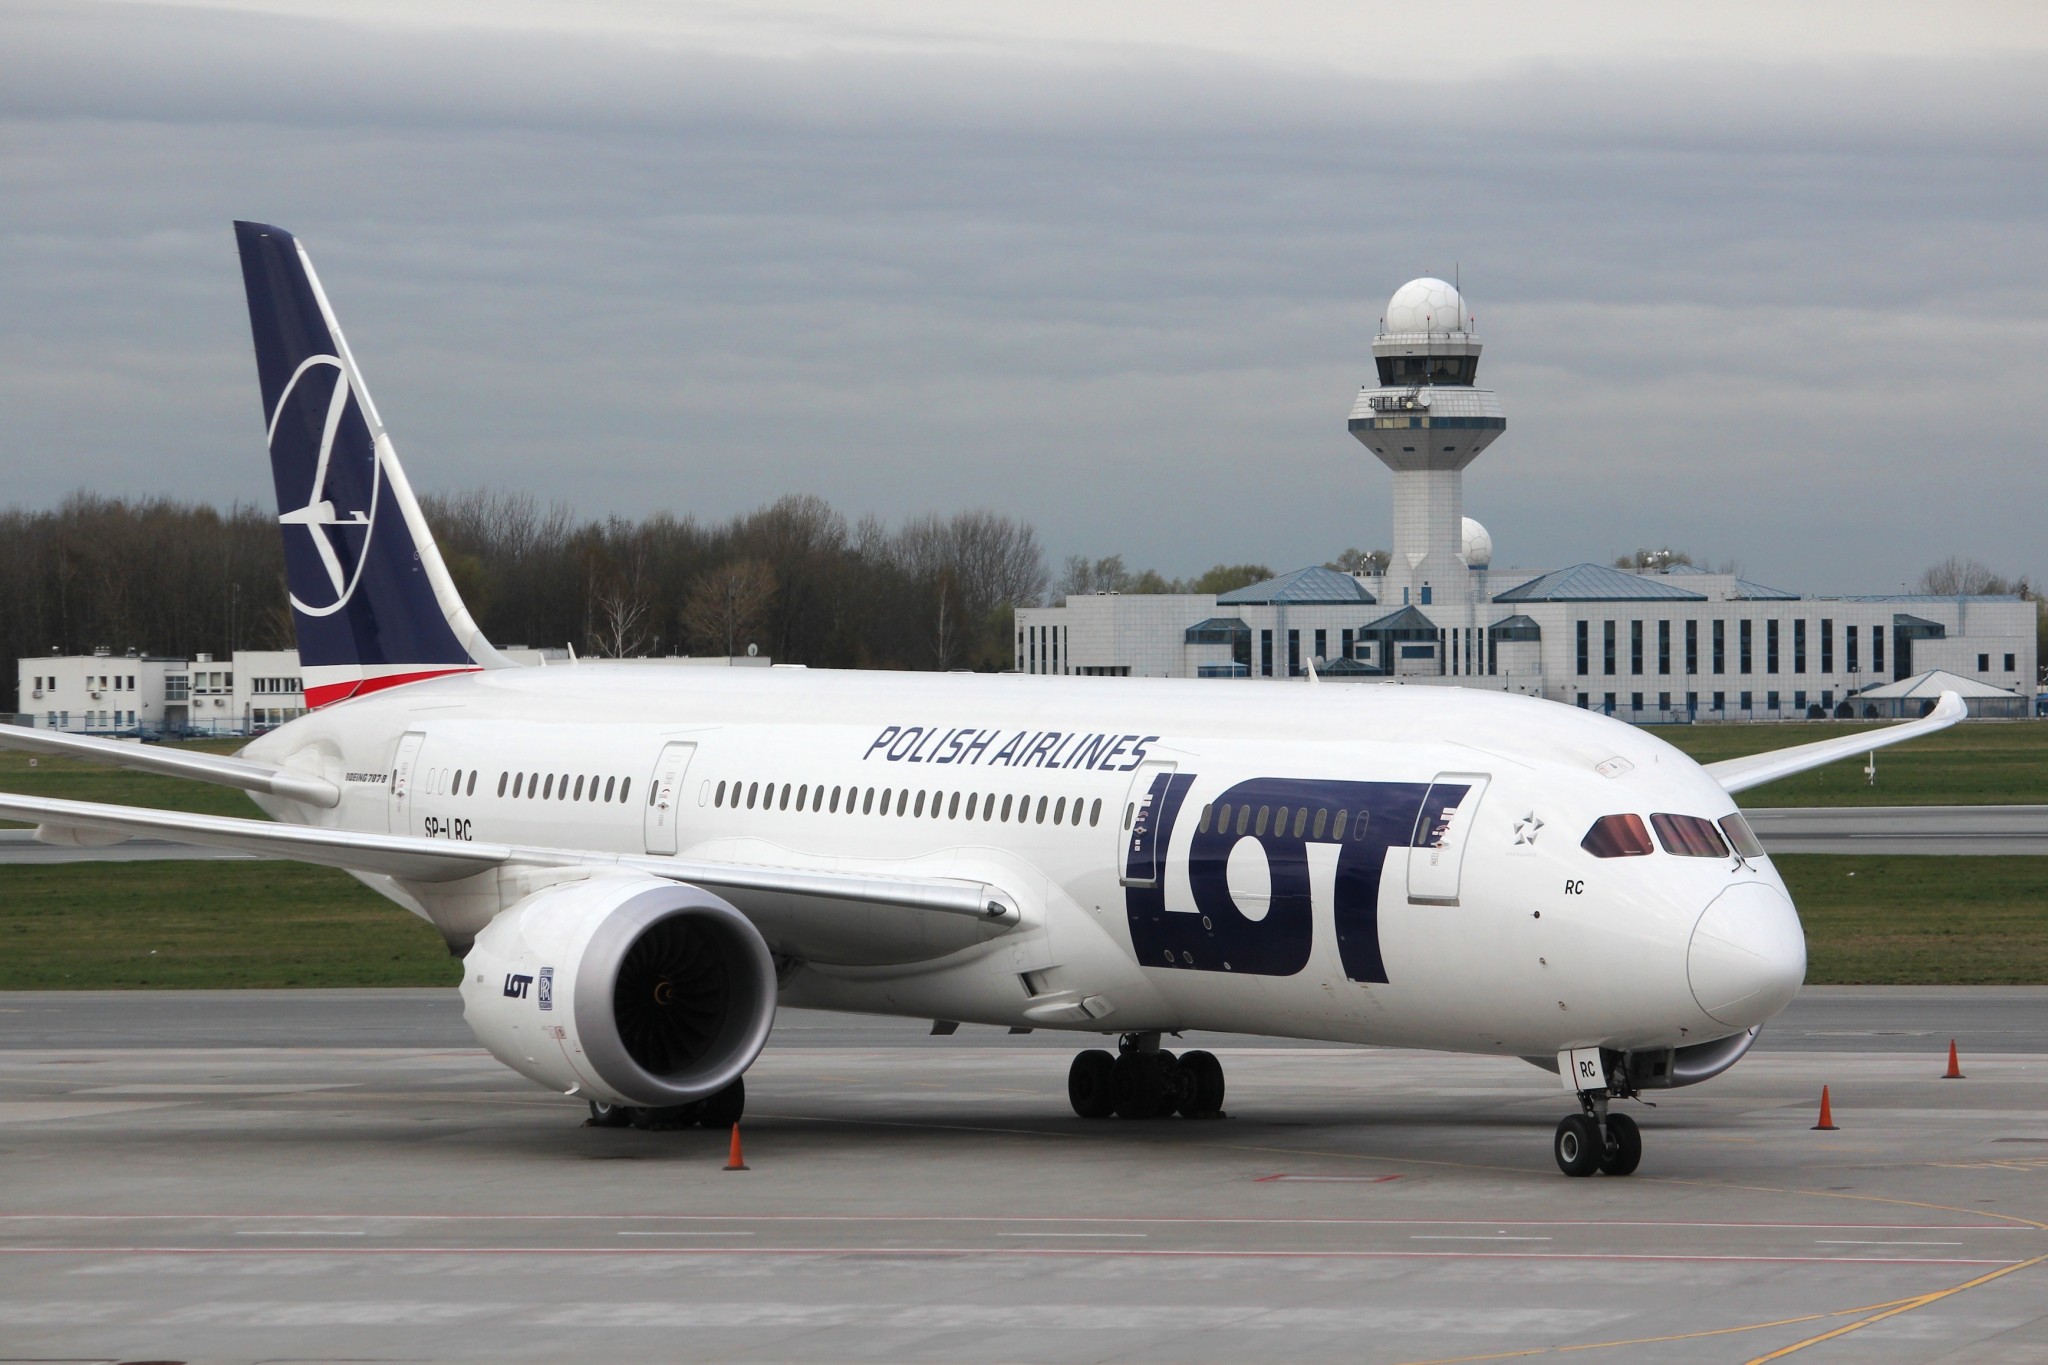 LOT Polish launches new Wroclaw-Seoul route